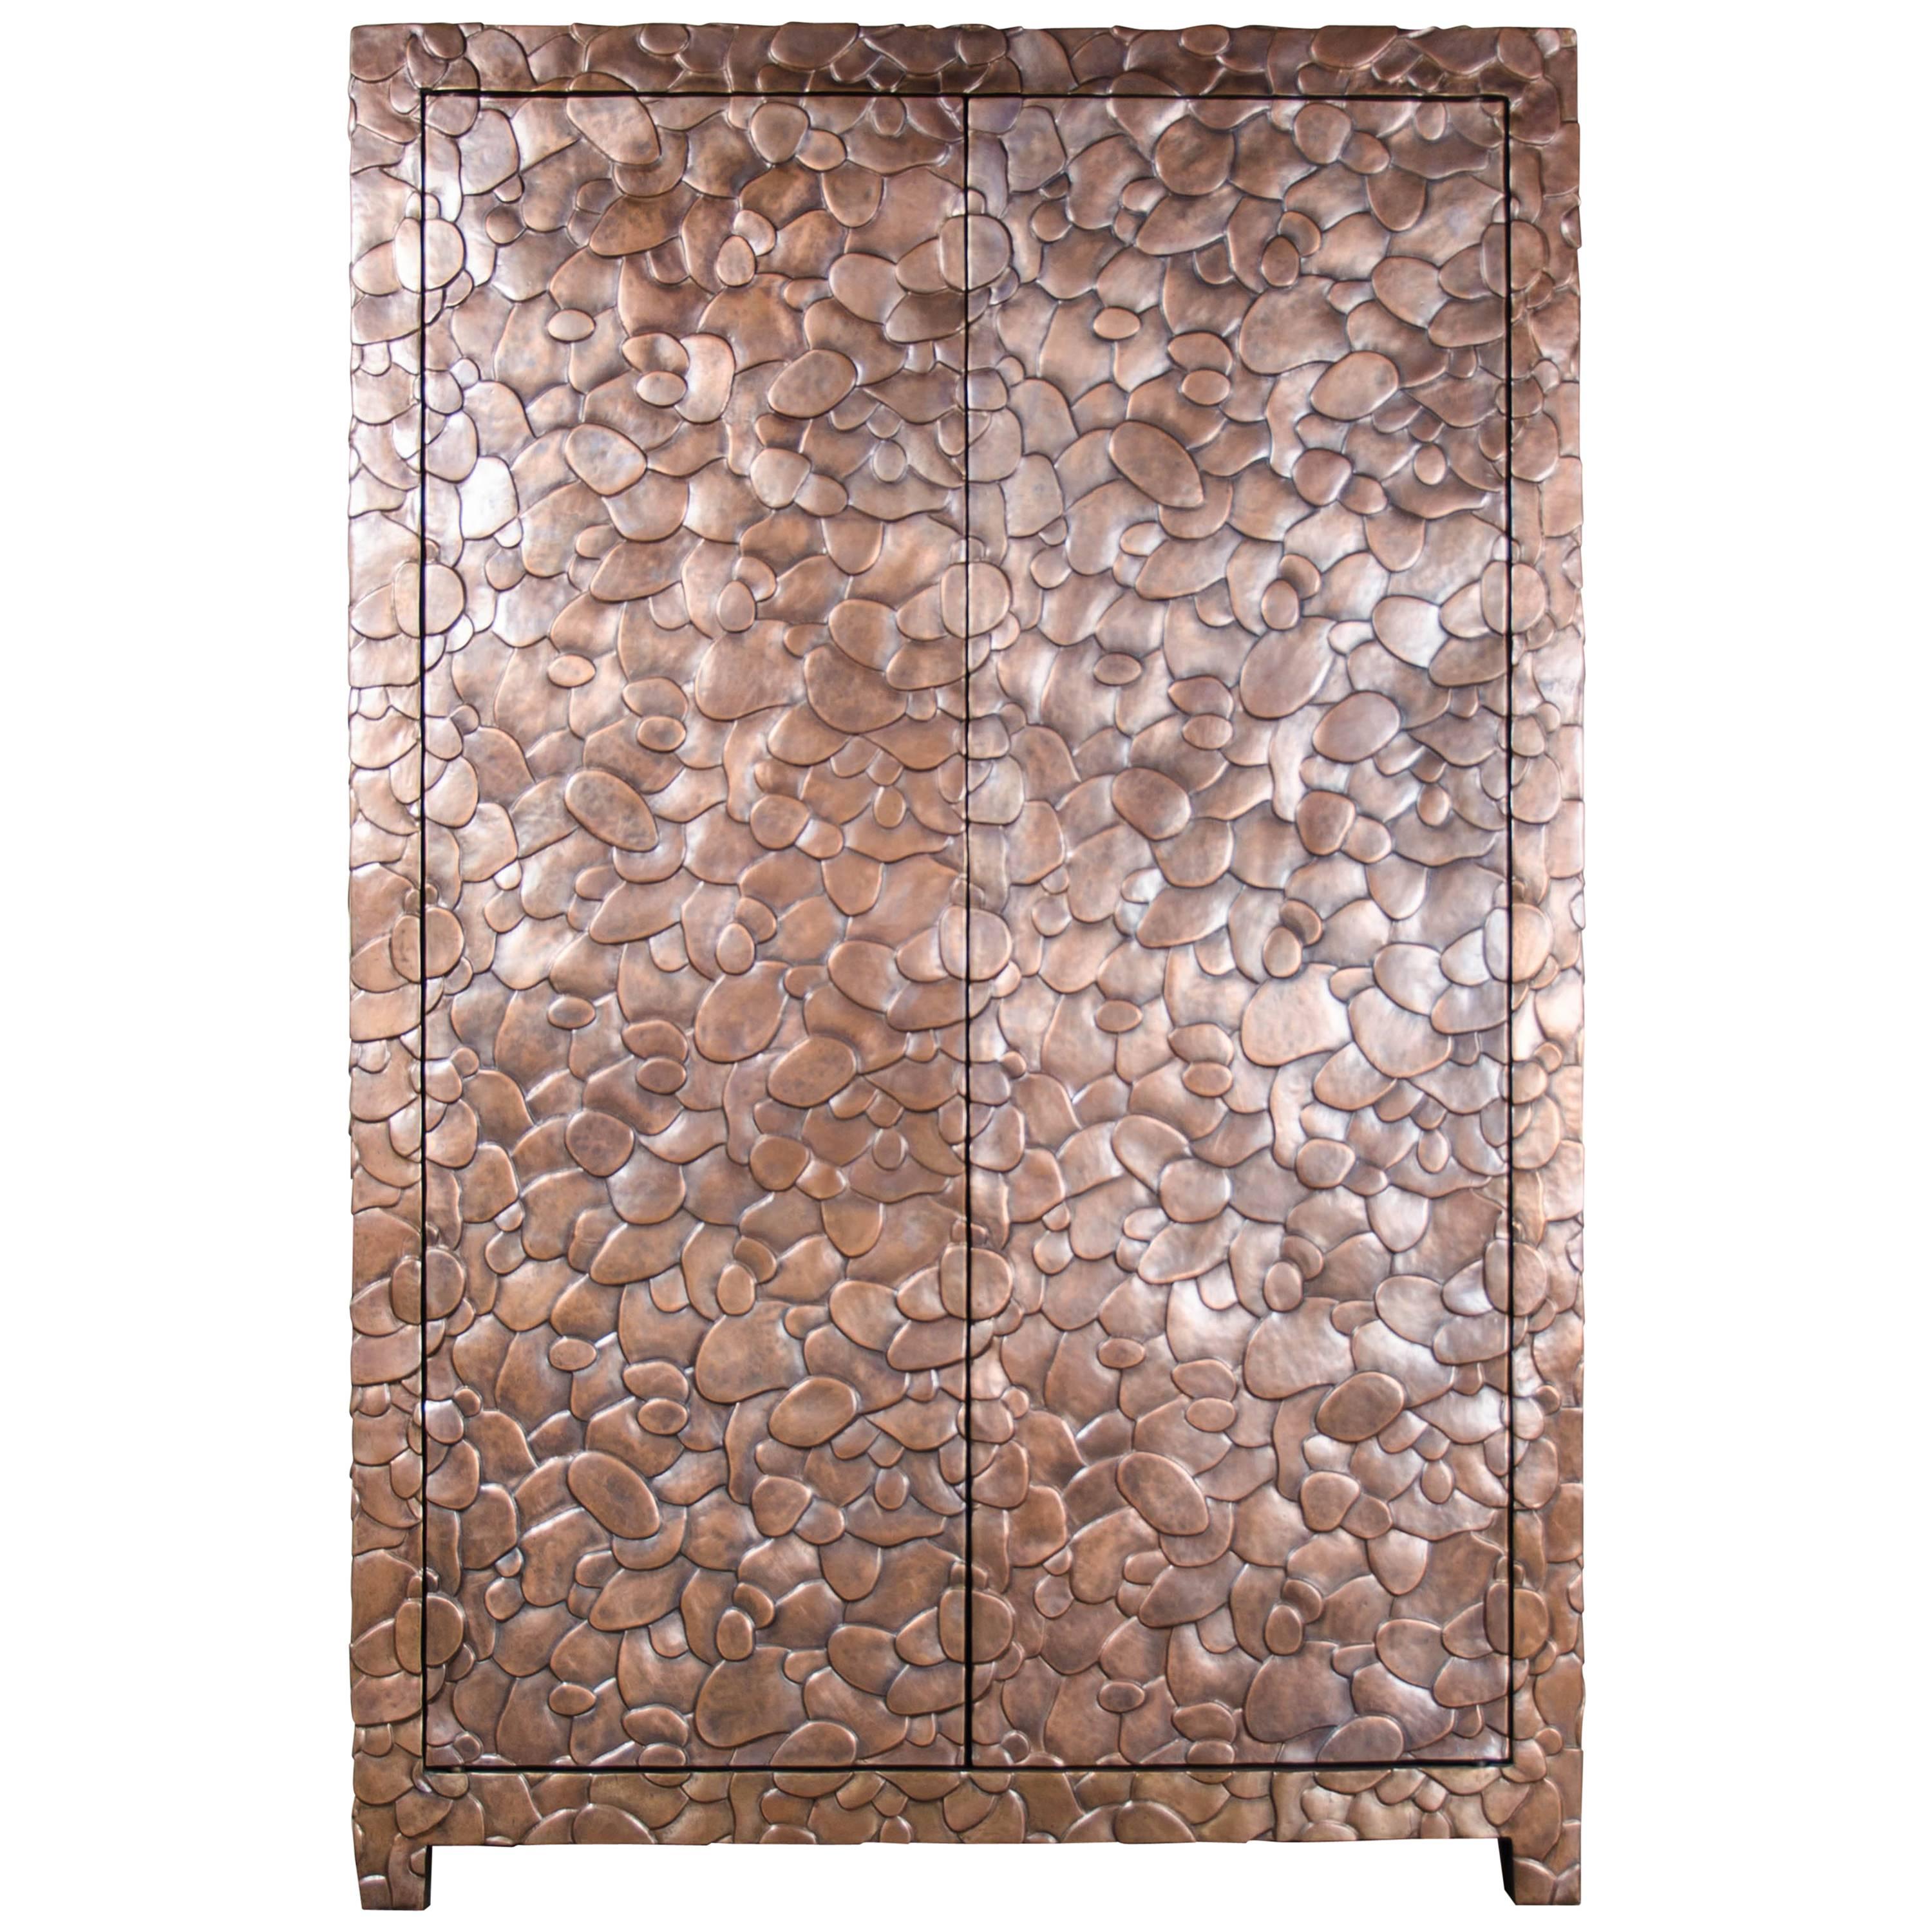 Isola Design Armoire, Copper by Robert Kuo, Limited Edition